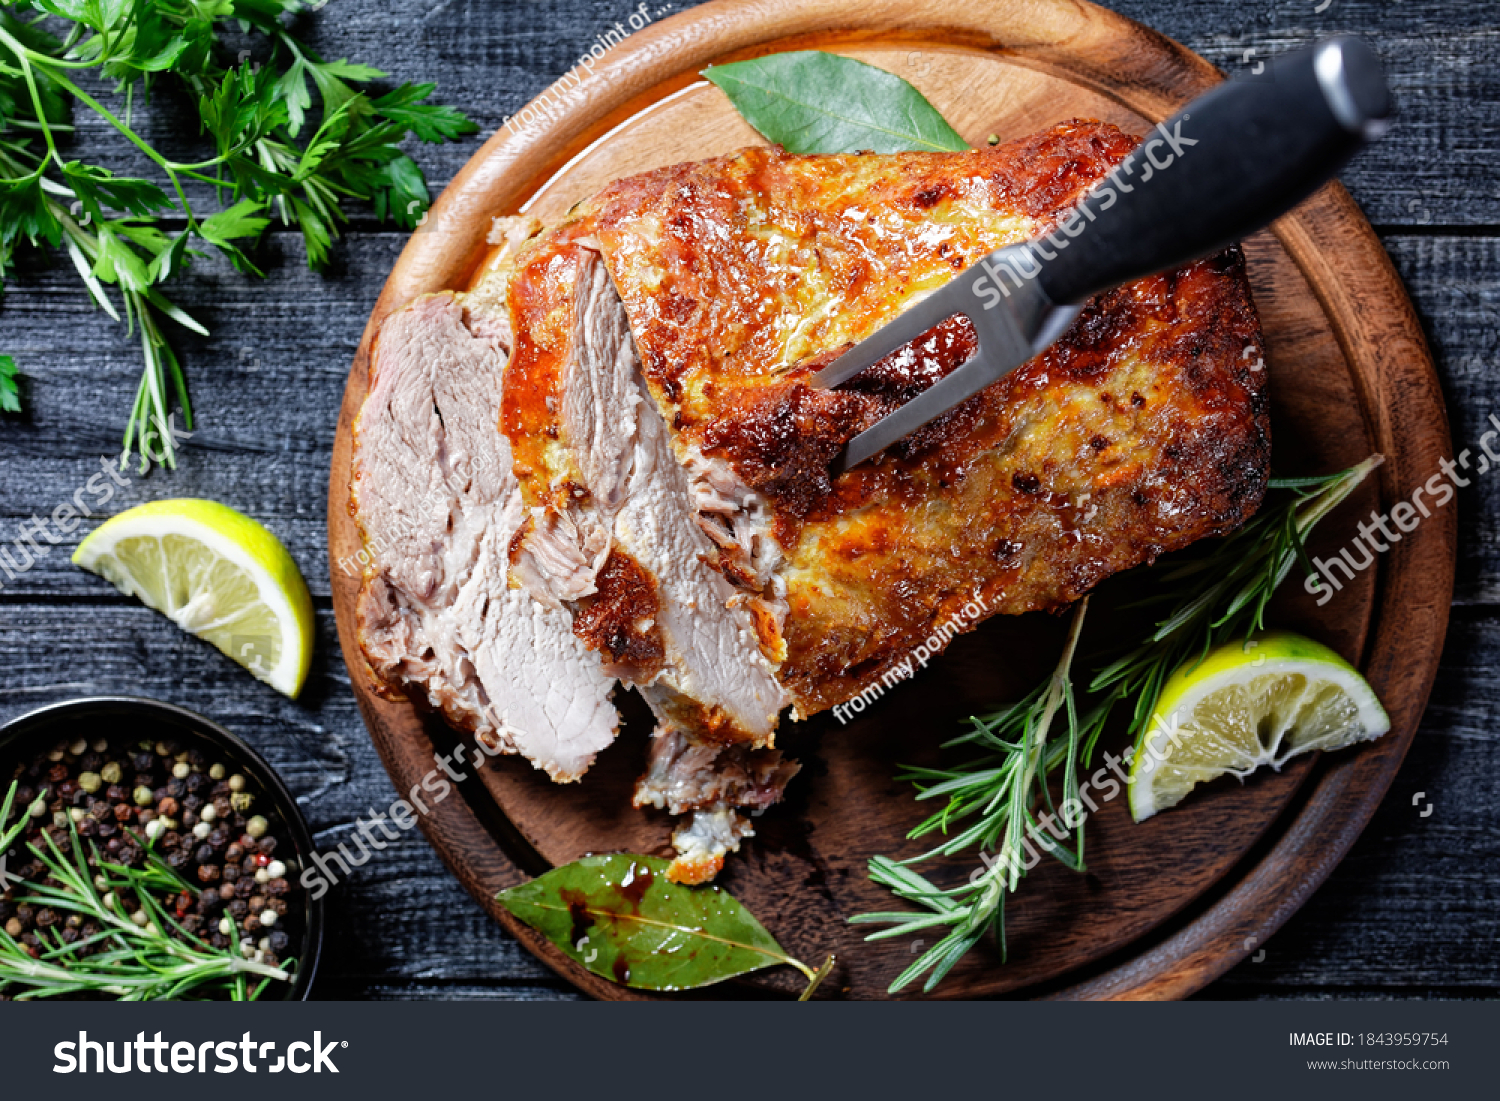 Sunday roasted pork tenderloin, juicy and succulent oven-baked piece of meat rubbed with mustard and spices: rosemary, bay leaf, lime juice, and pepper on a wooden background, close-up, top view #1843959754